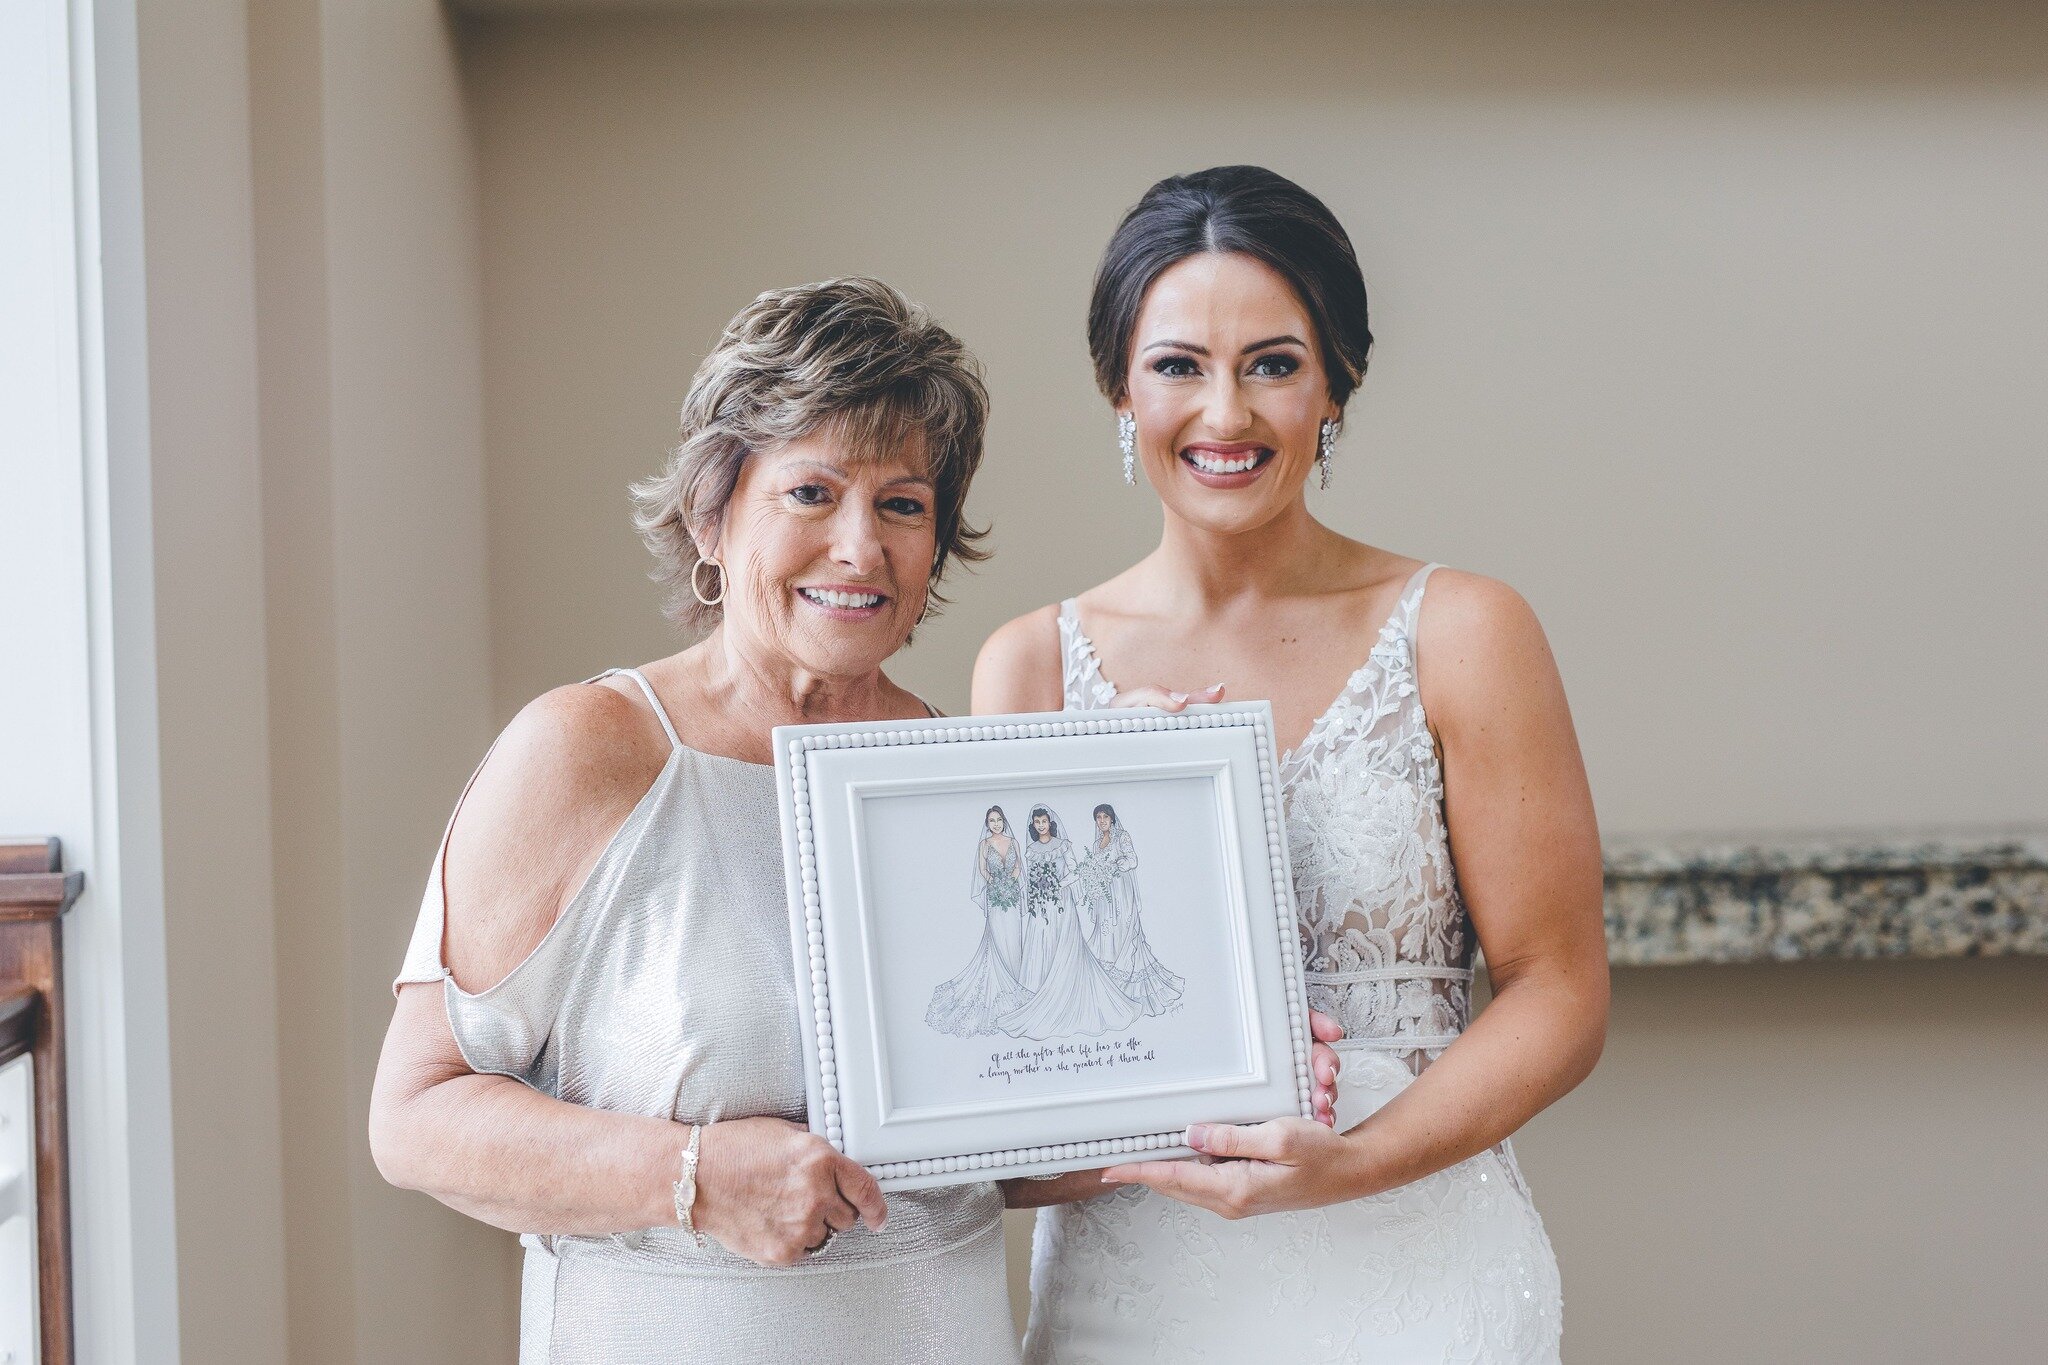 Thoughtful wedding gifts to your favorite people can be challenging to find.  However, something personalized like this sketch of three generations of brides is truly a beautiful keepsake to treasure. 💕

Images: @sarahbabcockstudio 
Venue: @coopercr